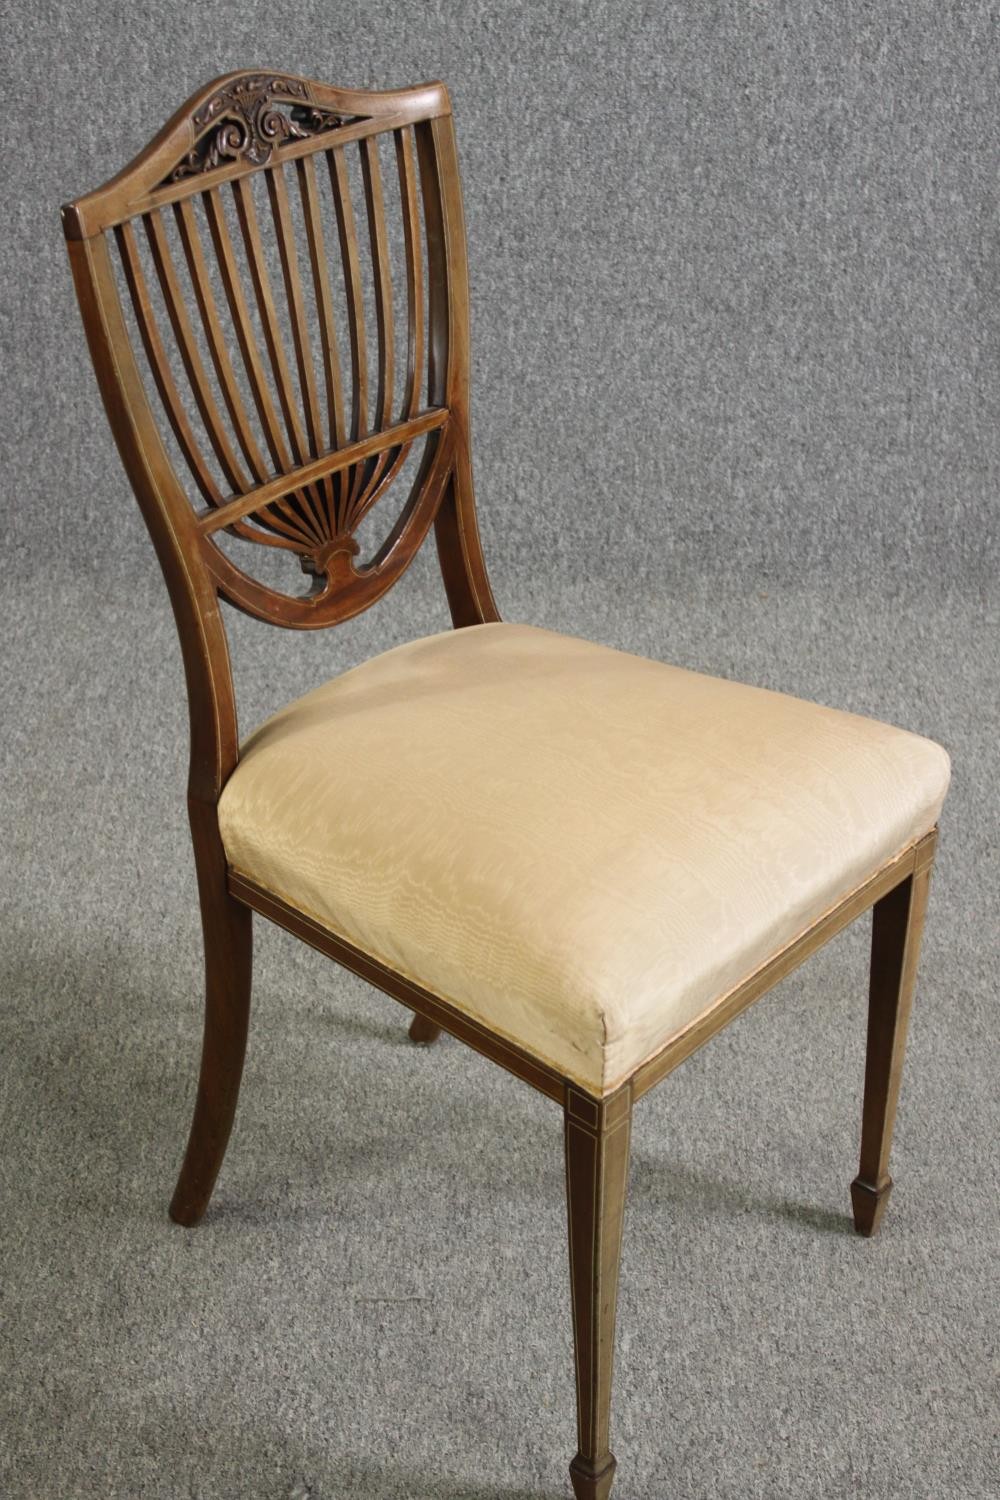 An Edwardian rosewood and inlaid side chair in the Sheraton style. - Image 2 of 6